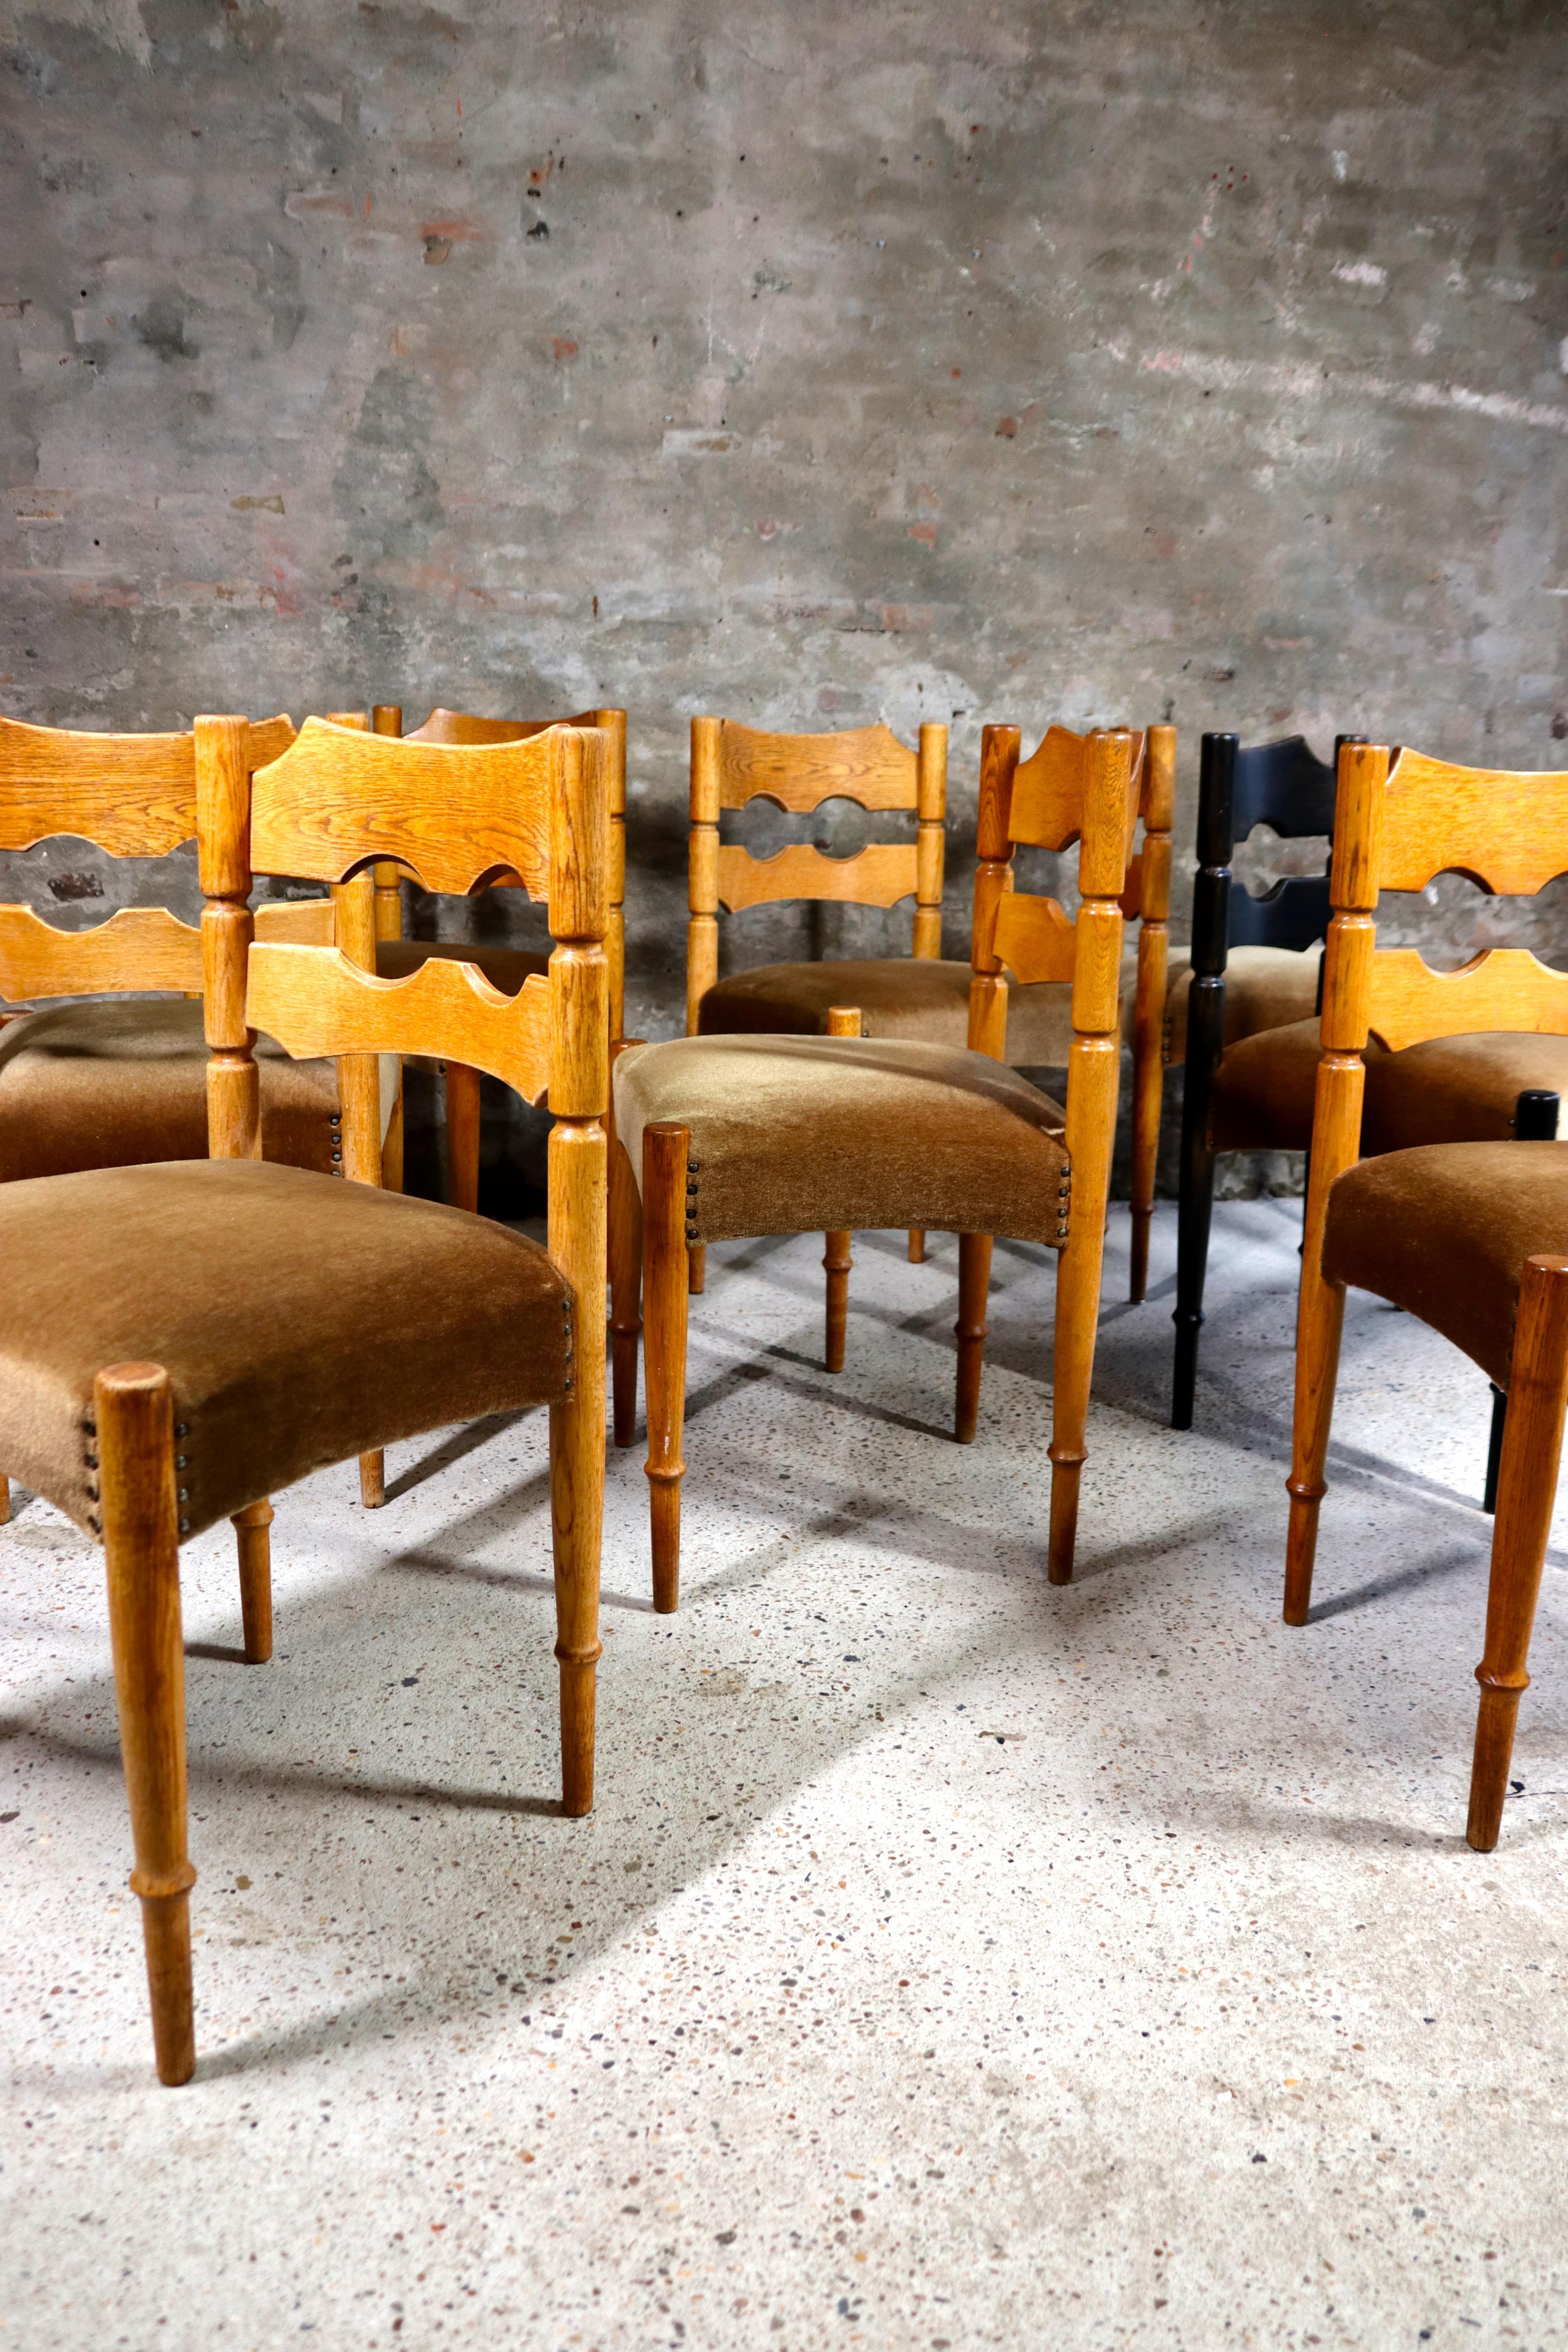 These chairs are designed by Henning Kjaernulf in the 1960s. The chairs are mostly untouched and still completely original. There are 7 normal chairs and 1 chair has been painted black. They’re all in generally good condition with signs of age. Some